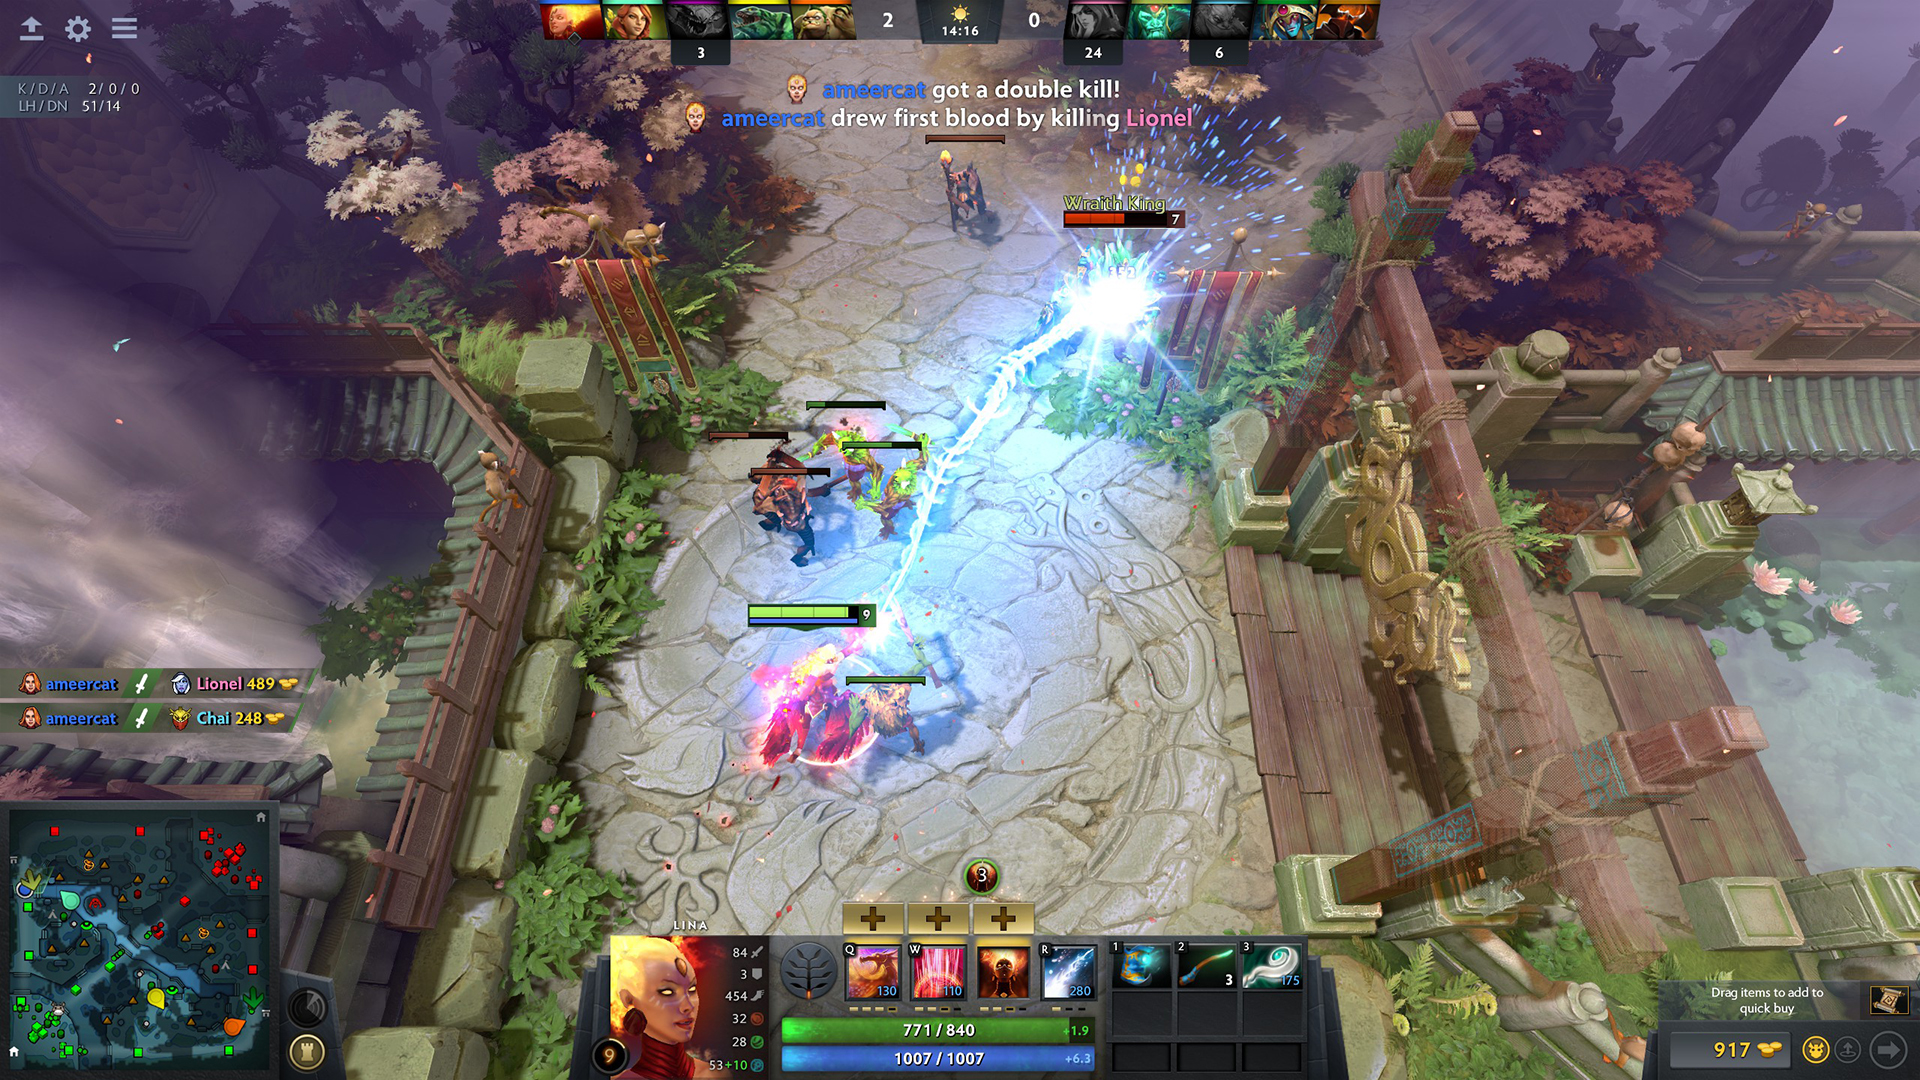 The best multiplayer PC games: Dota 2